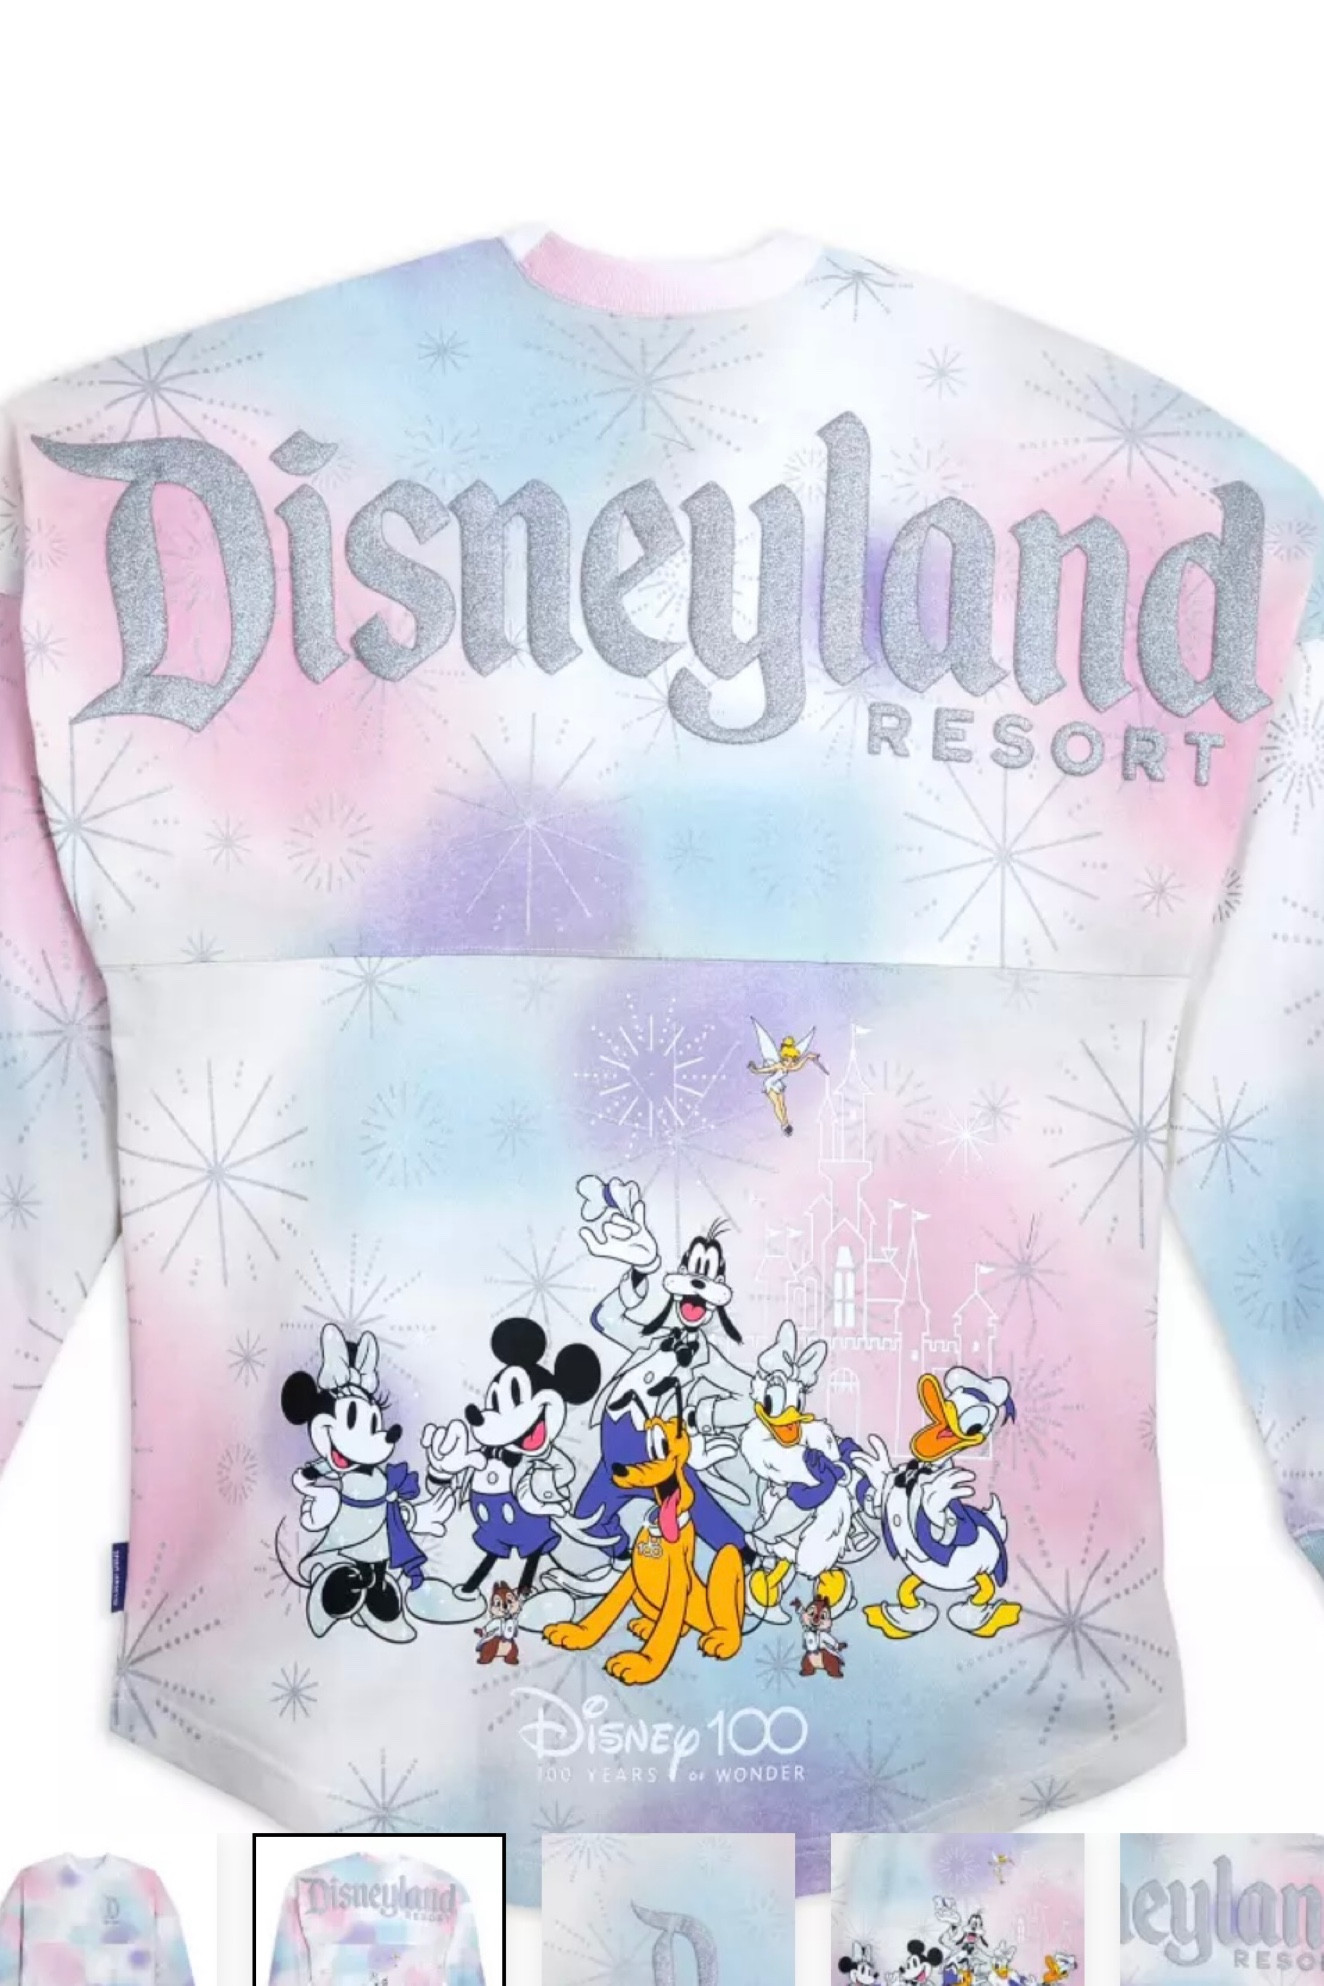 Mickey Mouse and Friends Disney100 Spirit Jersey for Adults, Disneyland